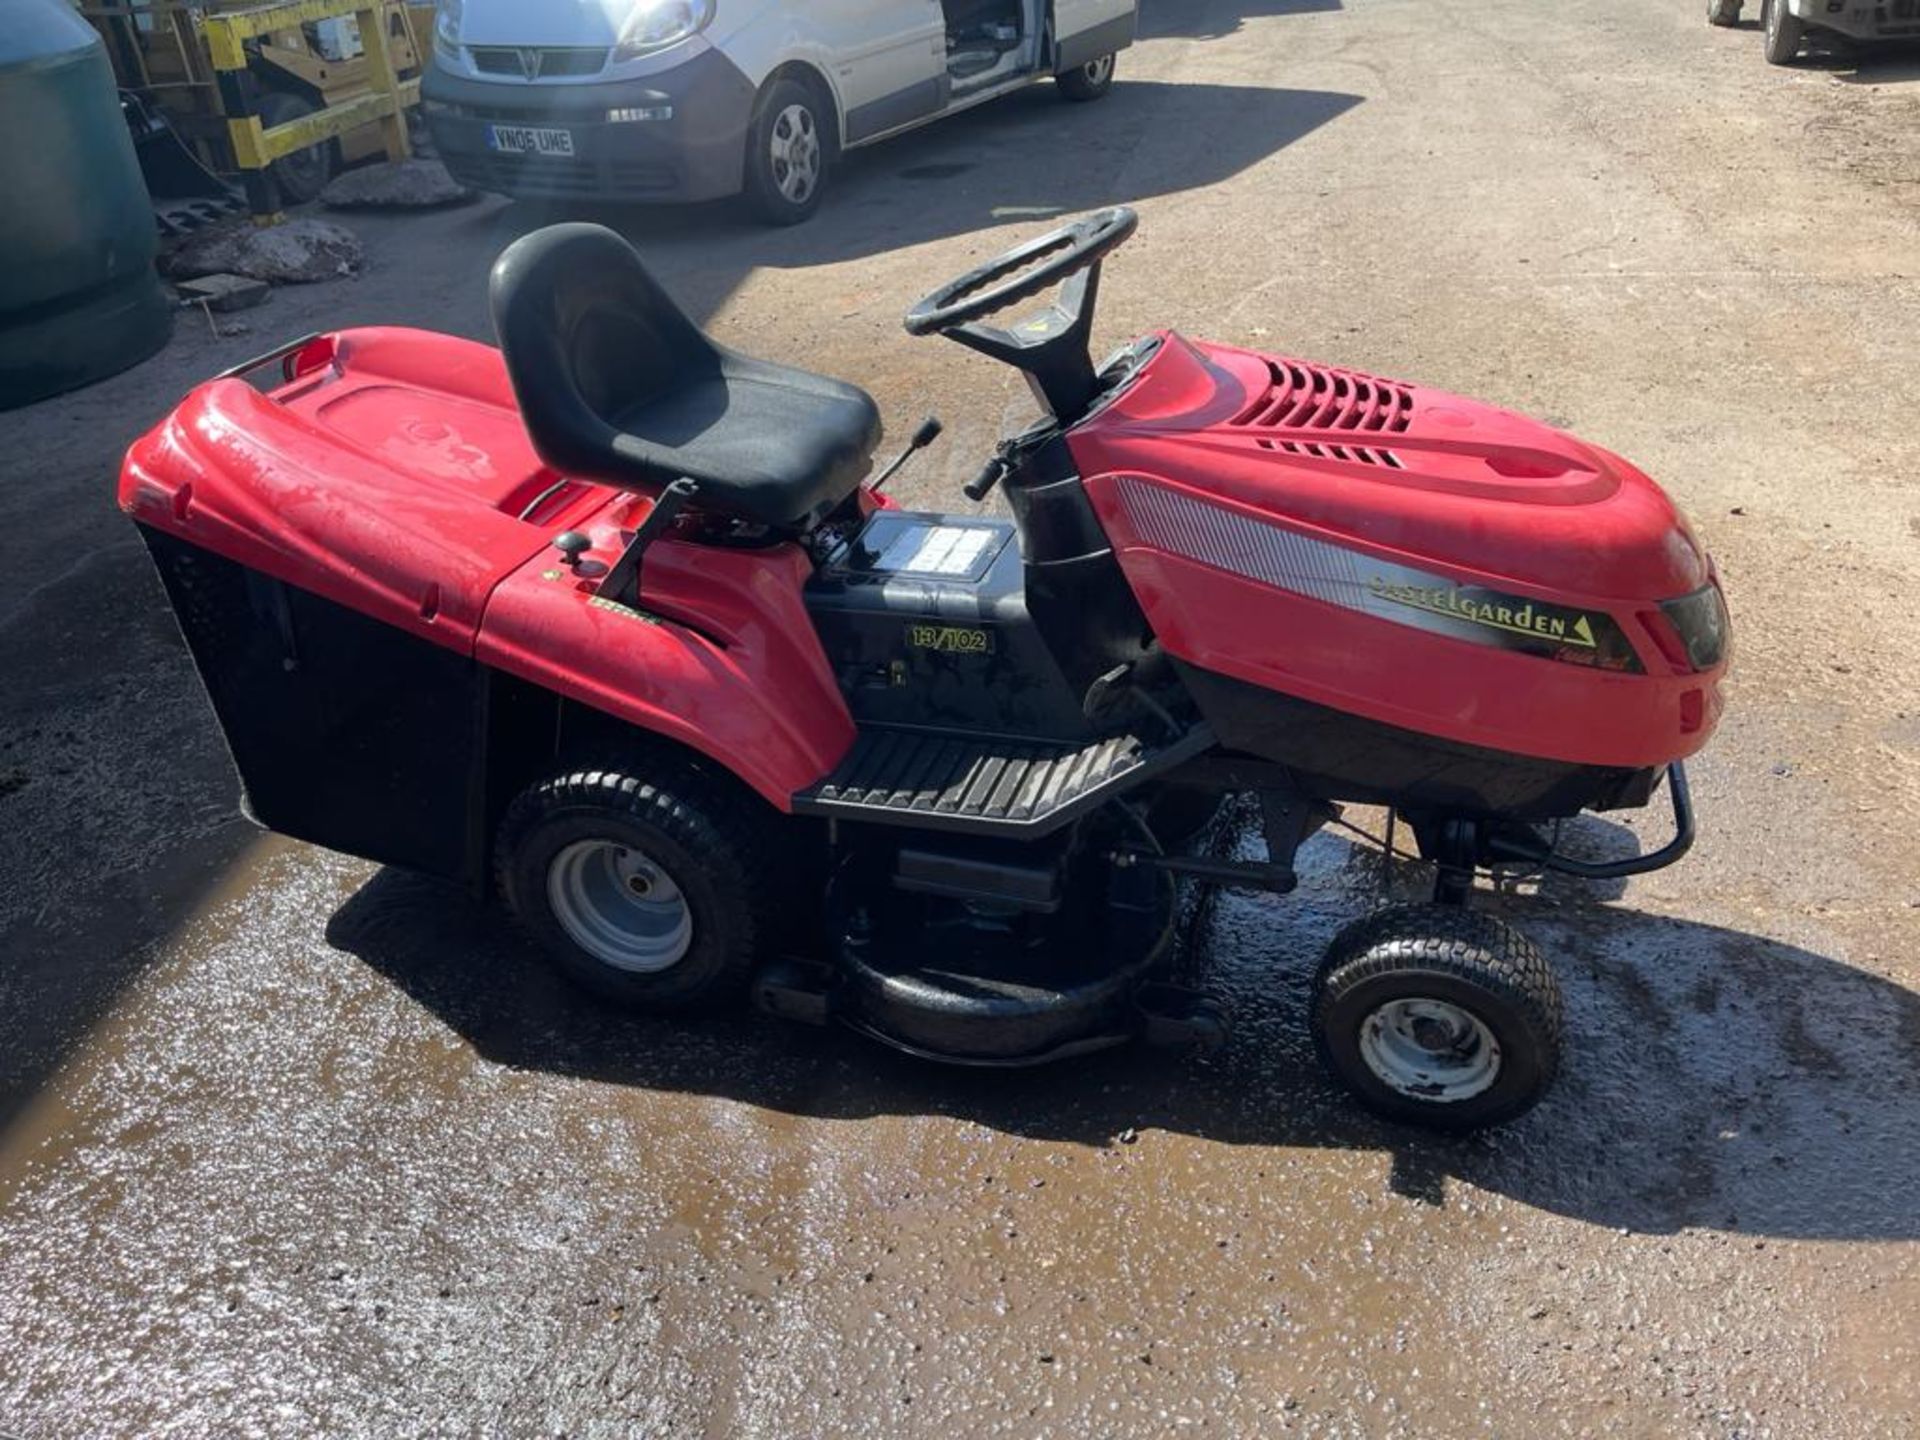 CASTELGARDEN P/X RIDE ON MOWER 13/102 TWIN CUT, STARTS DRIVES AND CUTS *NO VAT*